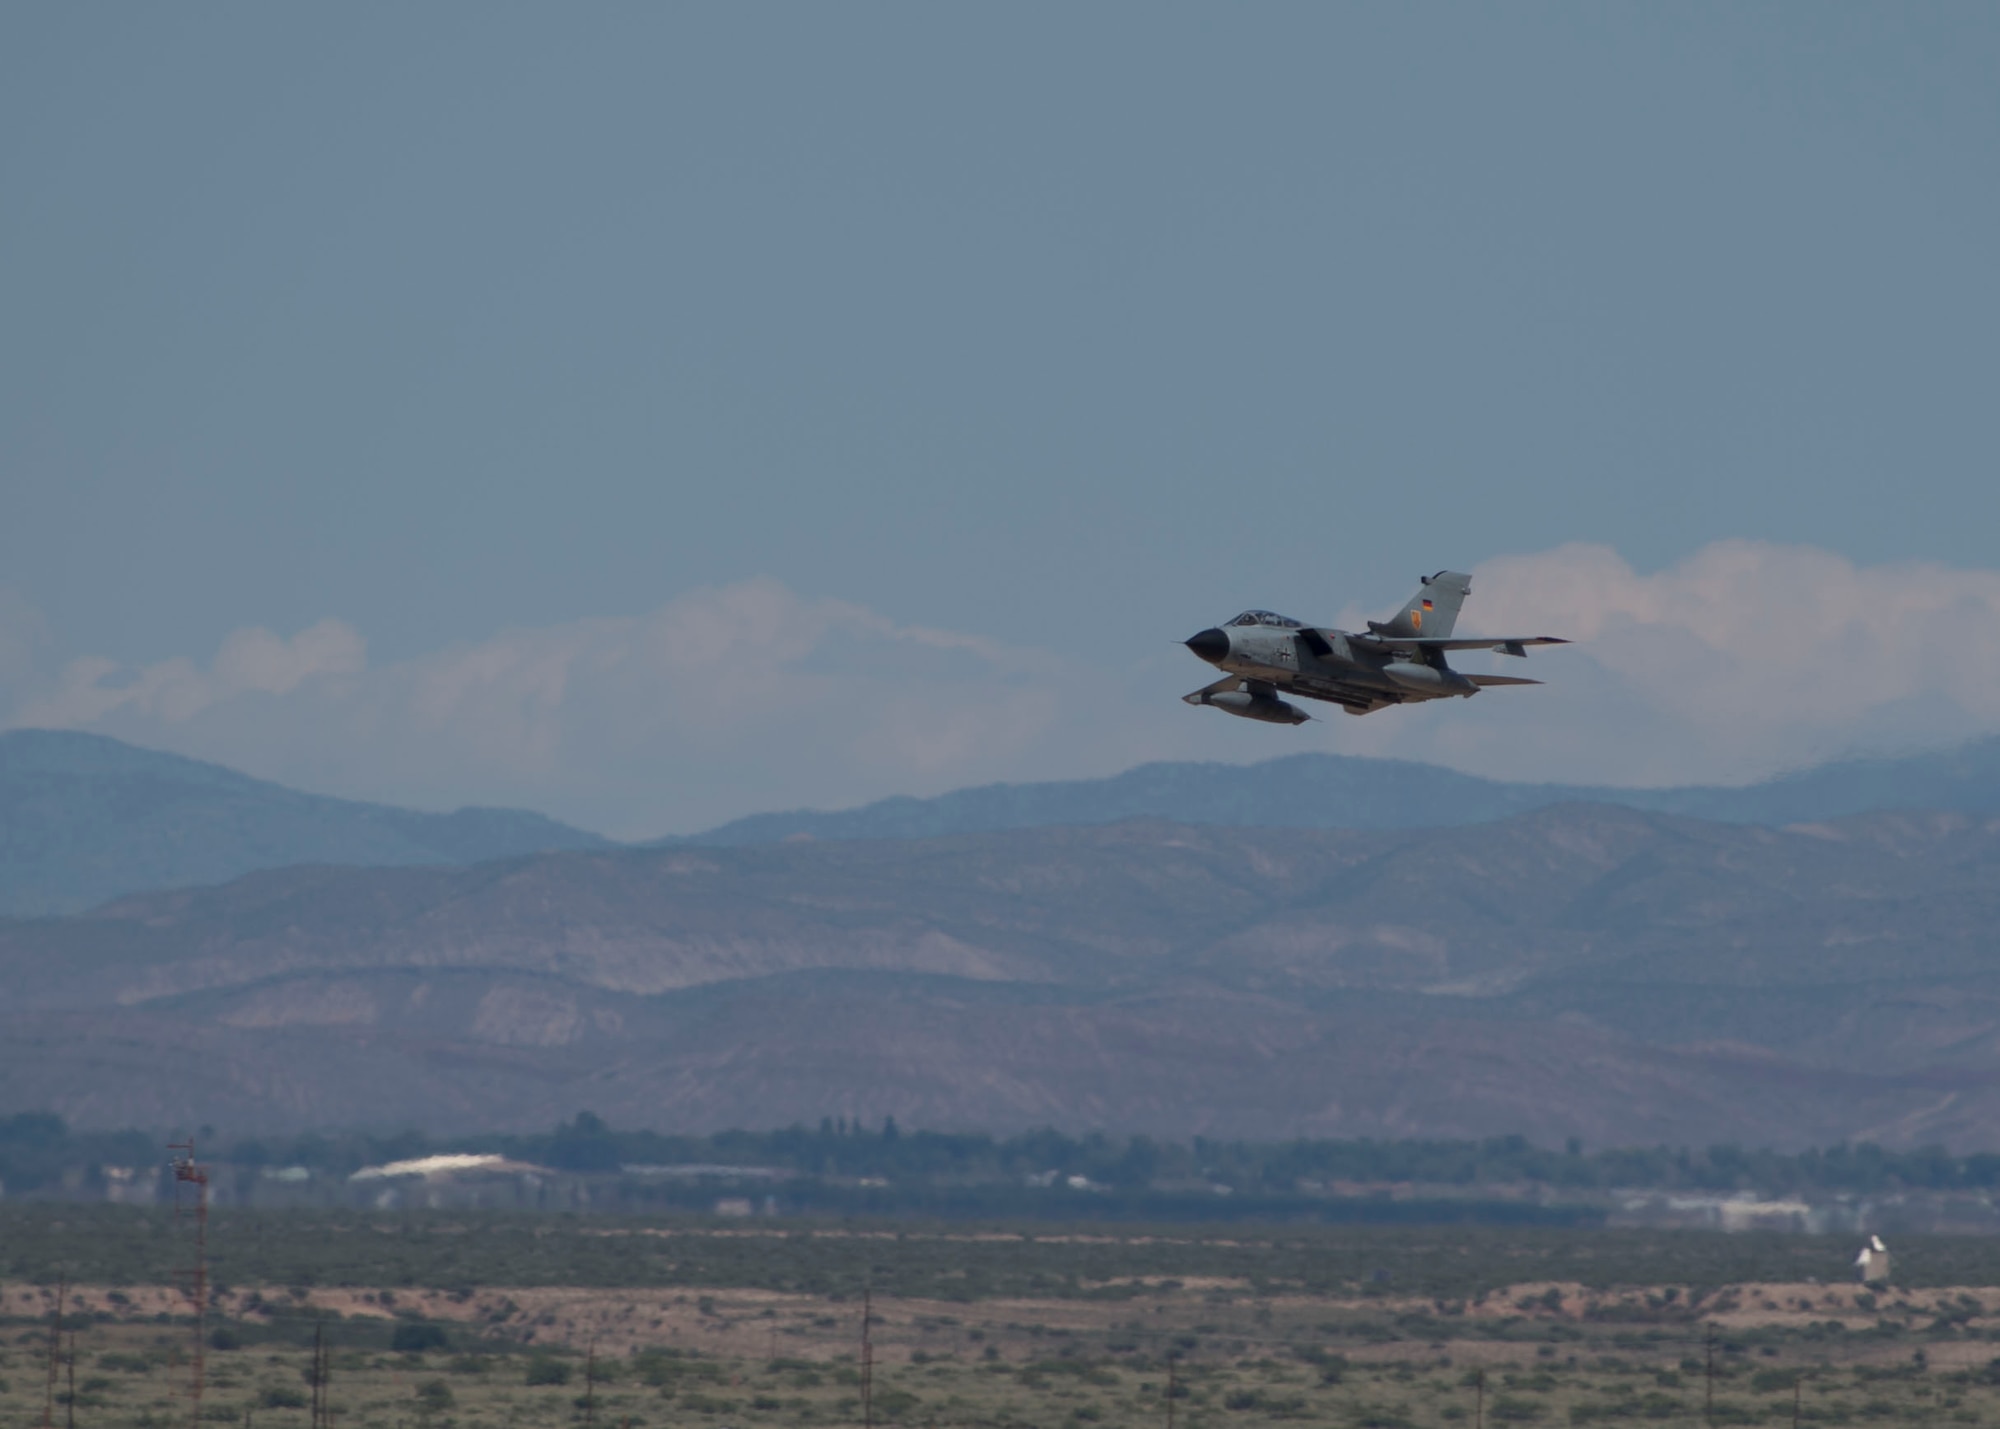 A German air force Tornado aircraft prepares to land following its last flying mission with an F-16 Fighting Falcon here at Holloman Air Force Base, N.M., Aug. 17, 2017. The German air force has entered its final stage of departure, however they will not complete their departure from Holloman AFB until mid 2019. (U.S. Air Force photo by Senior Airman Chase Cannon)